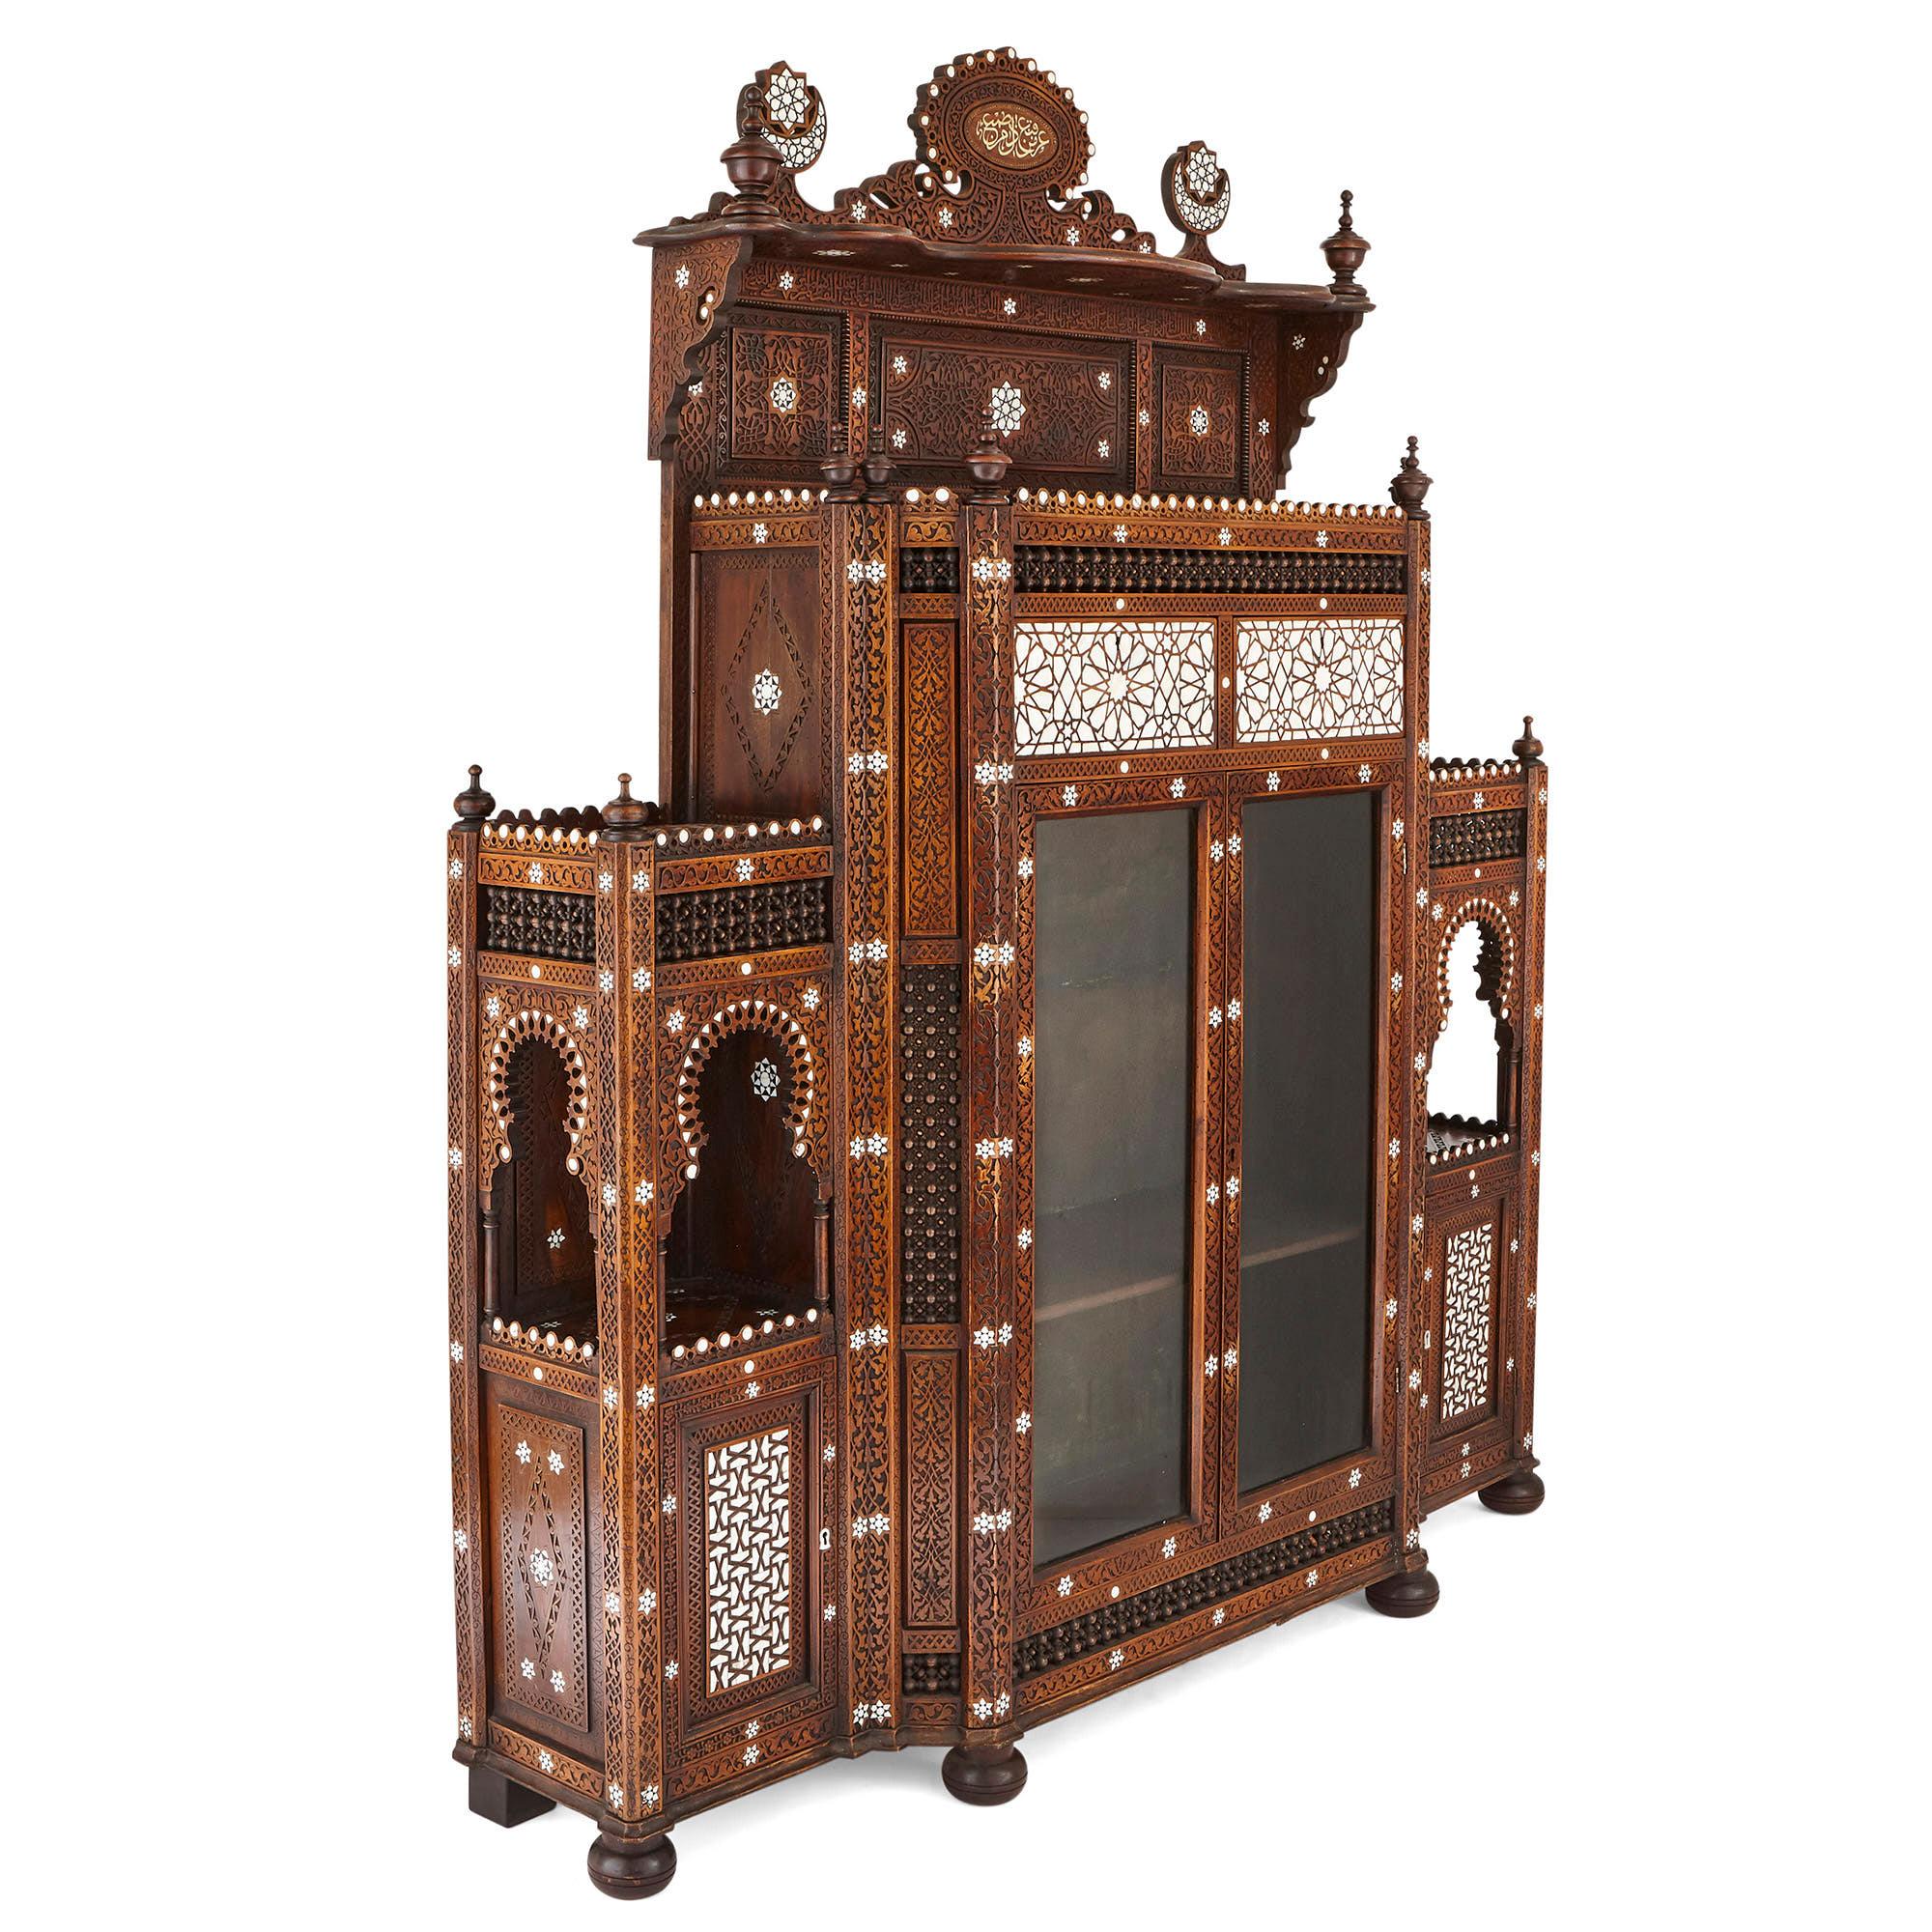 Produced in Syria during the late 19th century, this large cabinet is designed about a tripartite structural scheme. The cabinet features a tall centre that is flanked by two smaller cupboards, the whole unit standing upon a combination of bun and